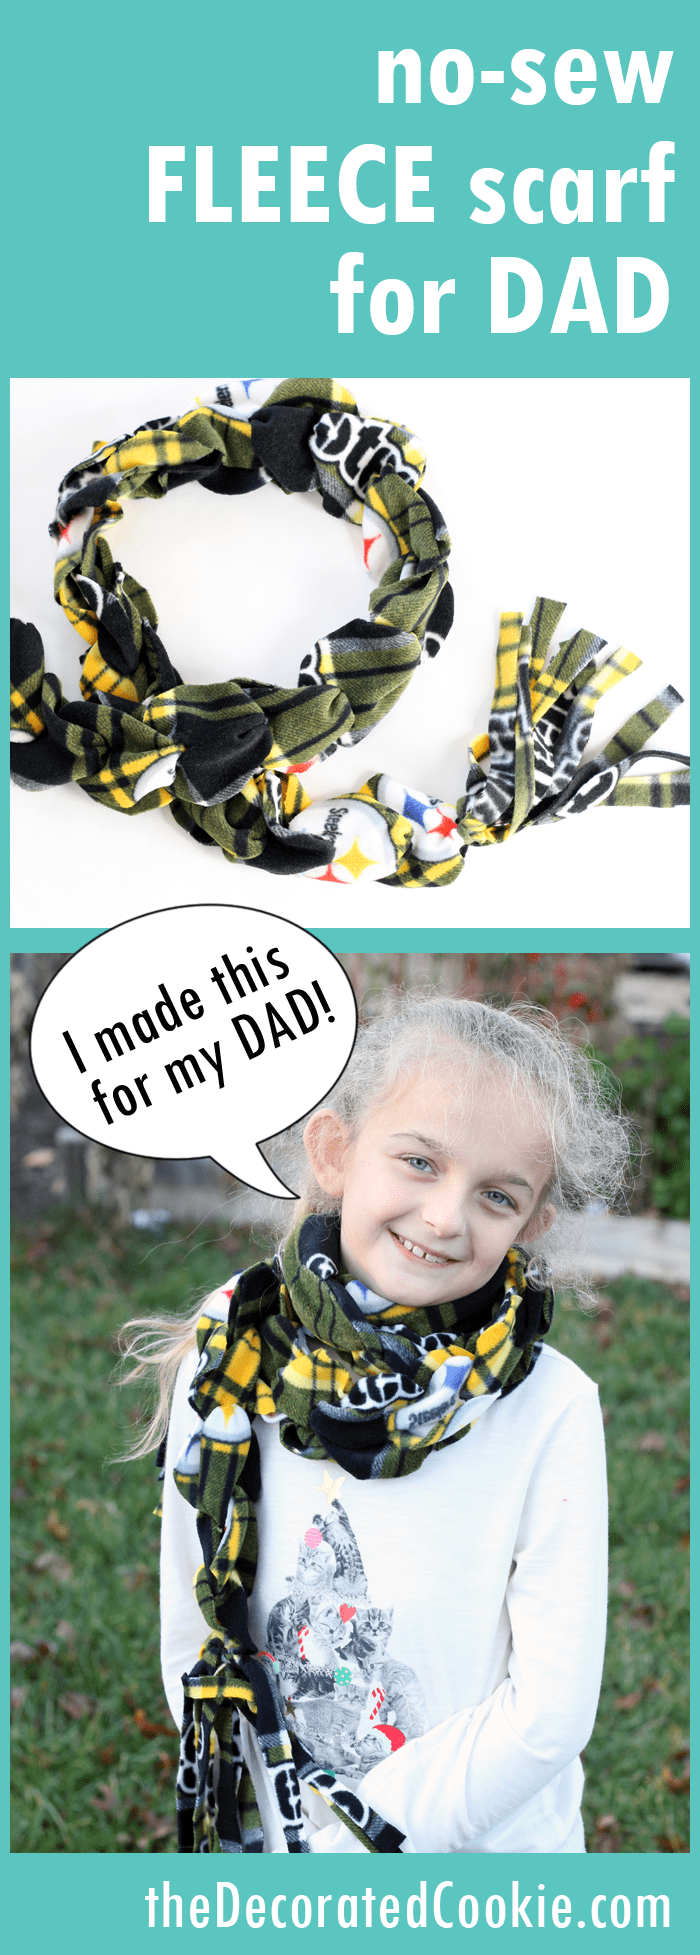 no-sew fleece scarf kids can make for Dad, holiday handmade gift idea 